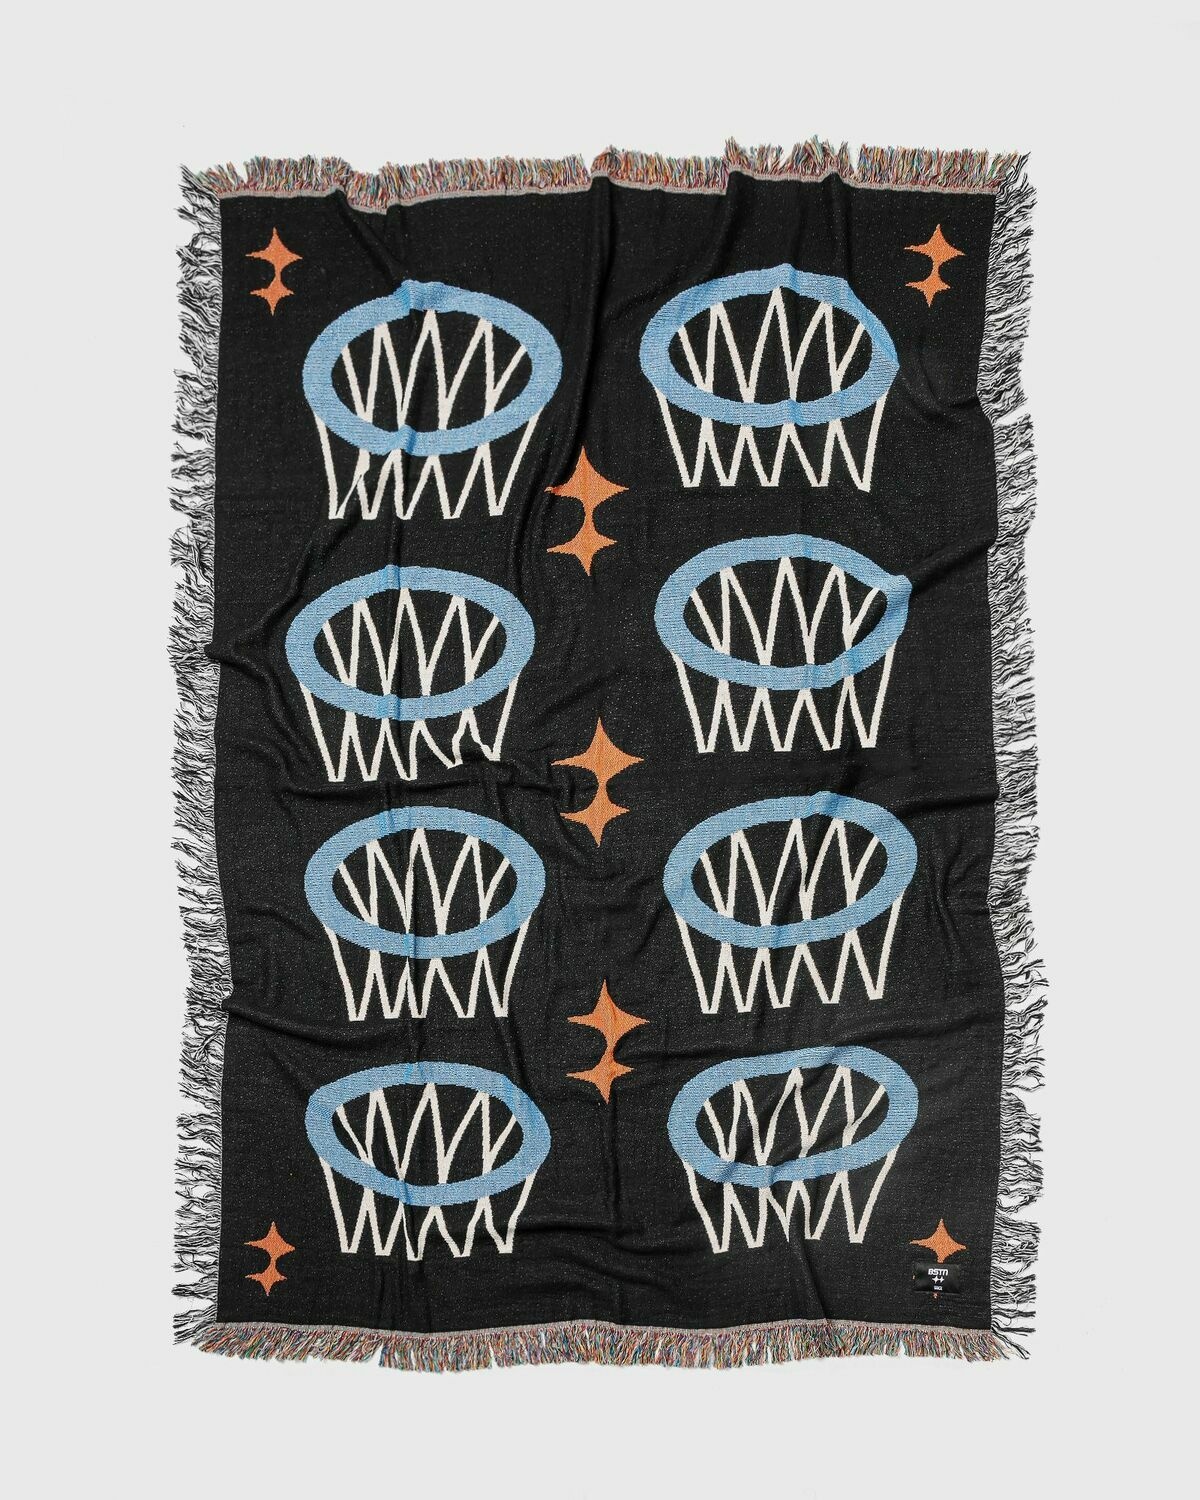 Bstn Brand Hoops Blanket By Sula Multi - Mens - Home Deco